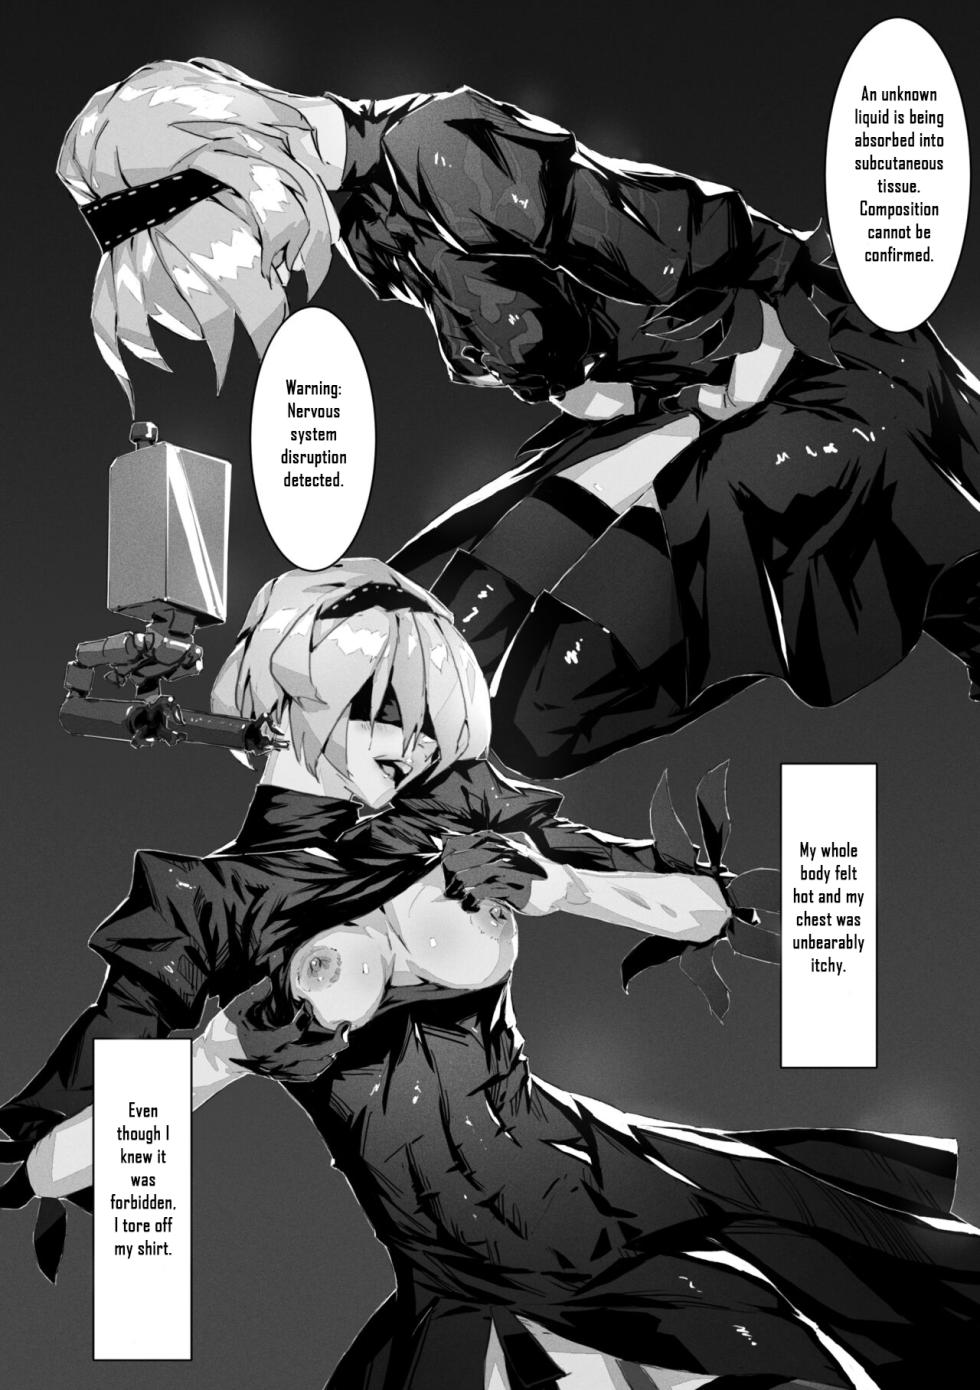 [Tyrant] 2B In Trouble Part 1-6 (NieR:Automata) - Page 8